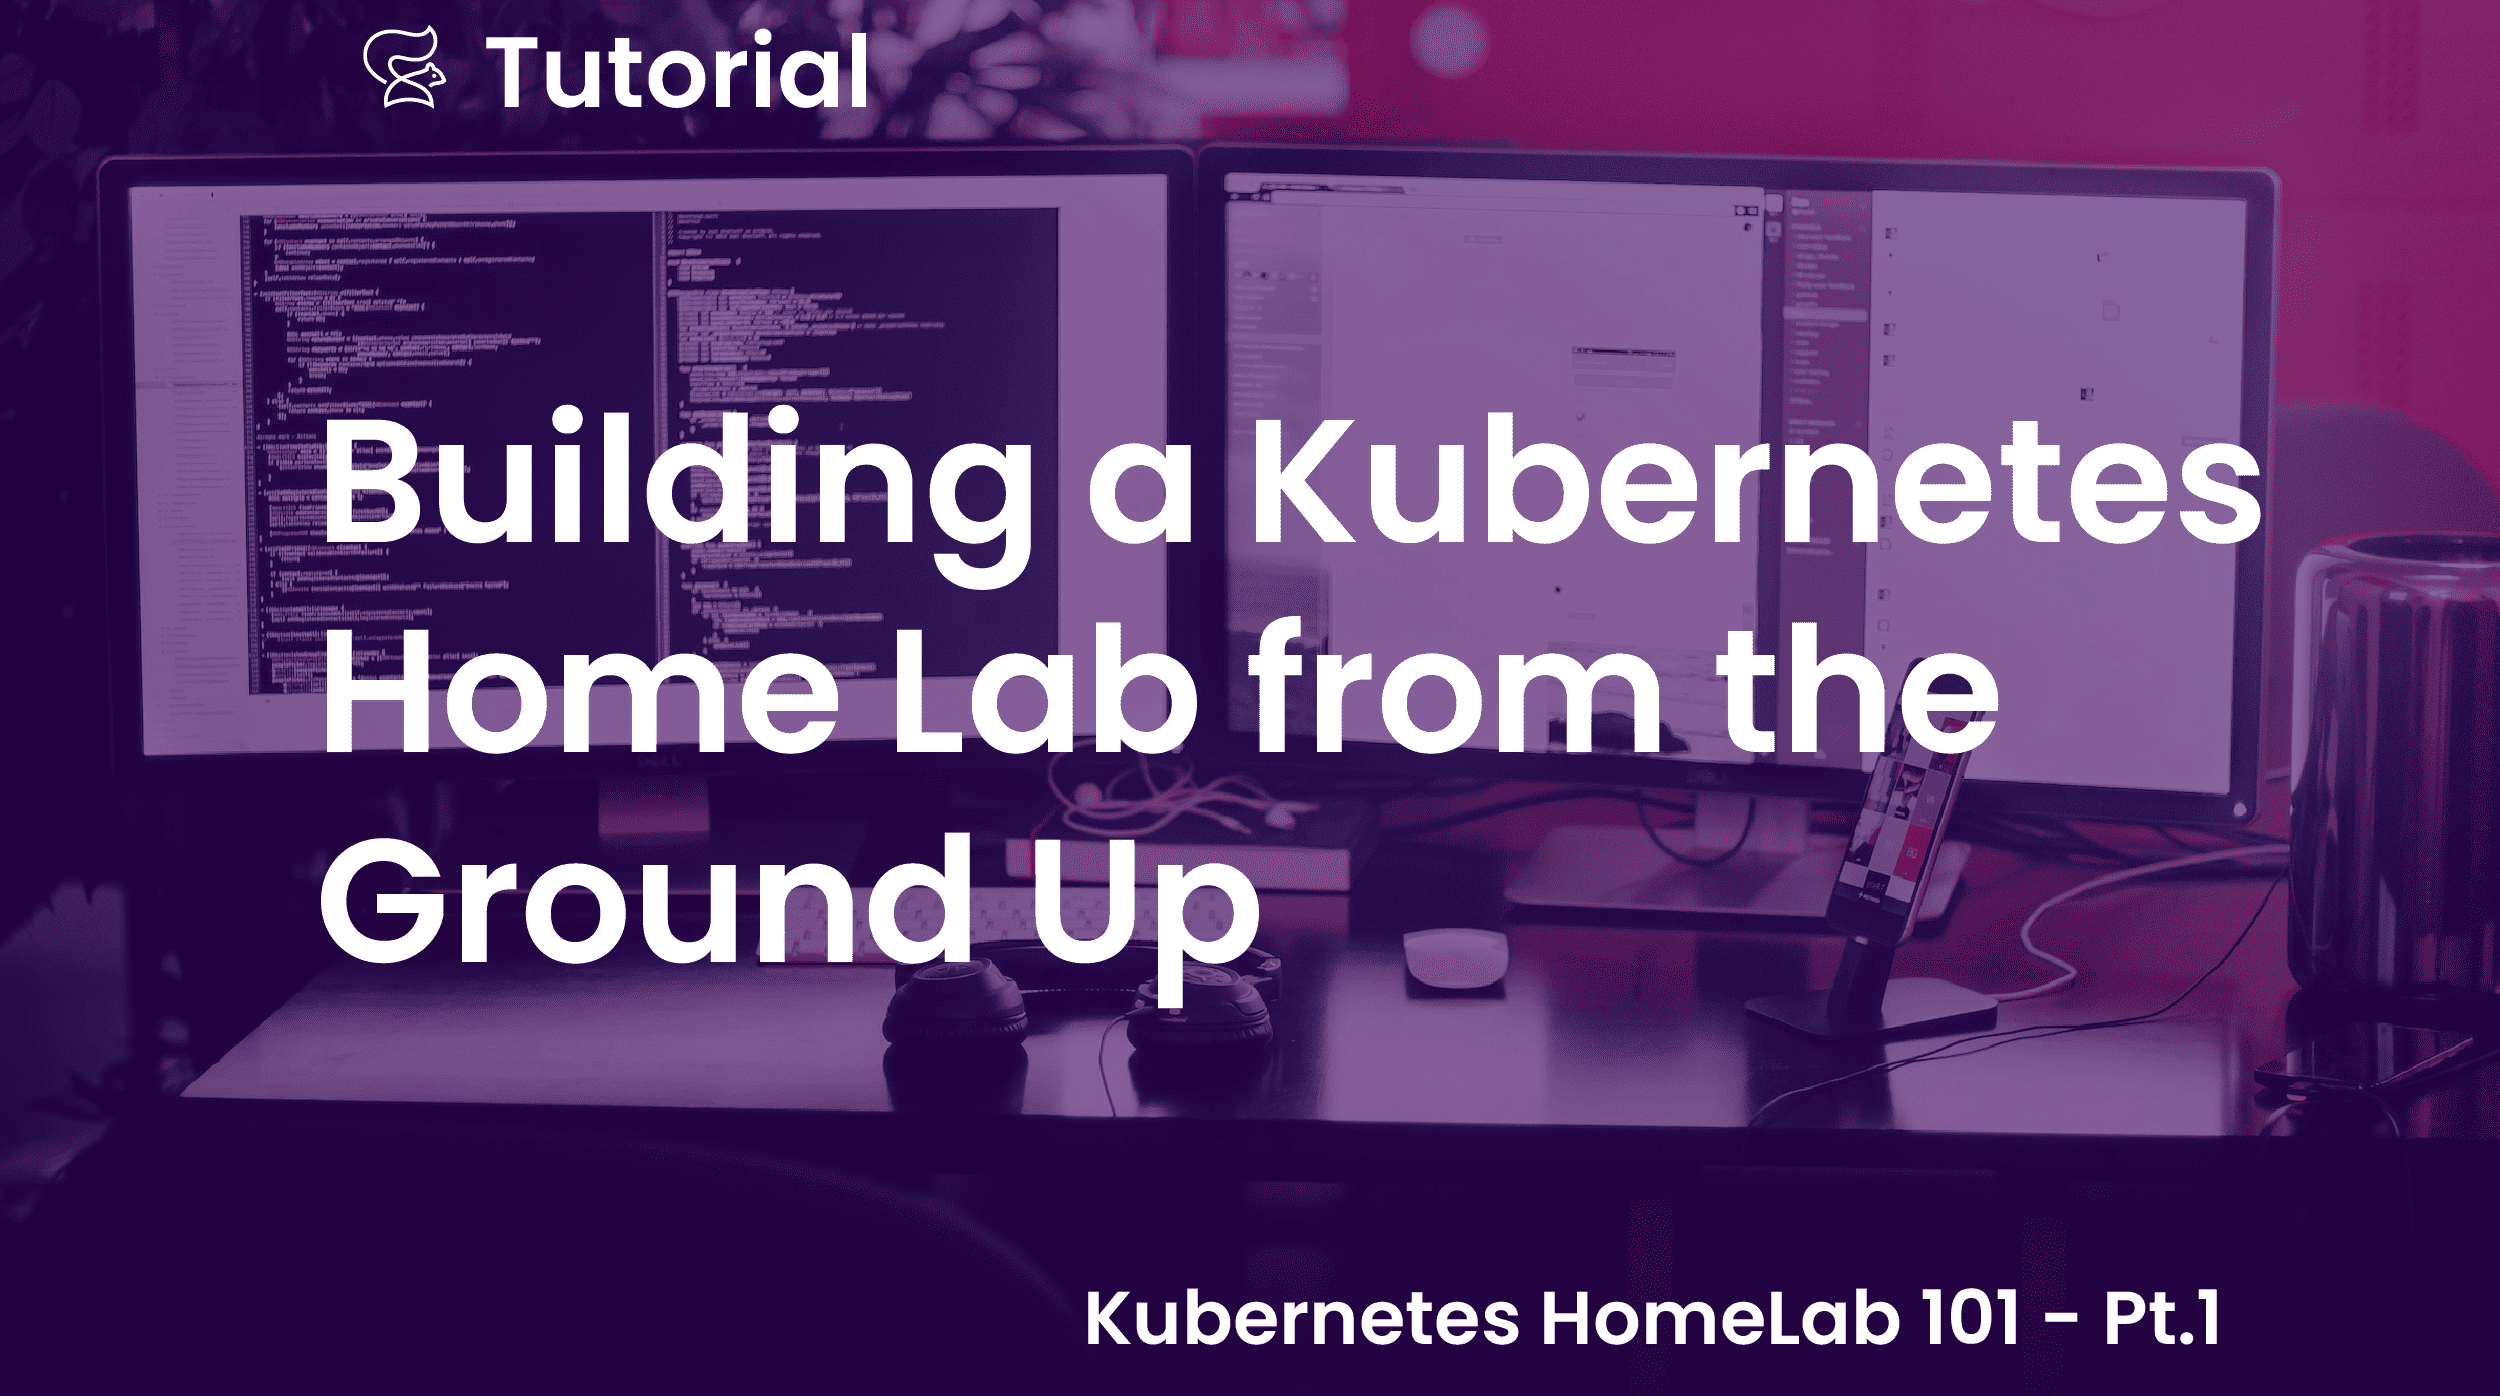 Building a Kubernetes Home Lab from the Ground Up